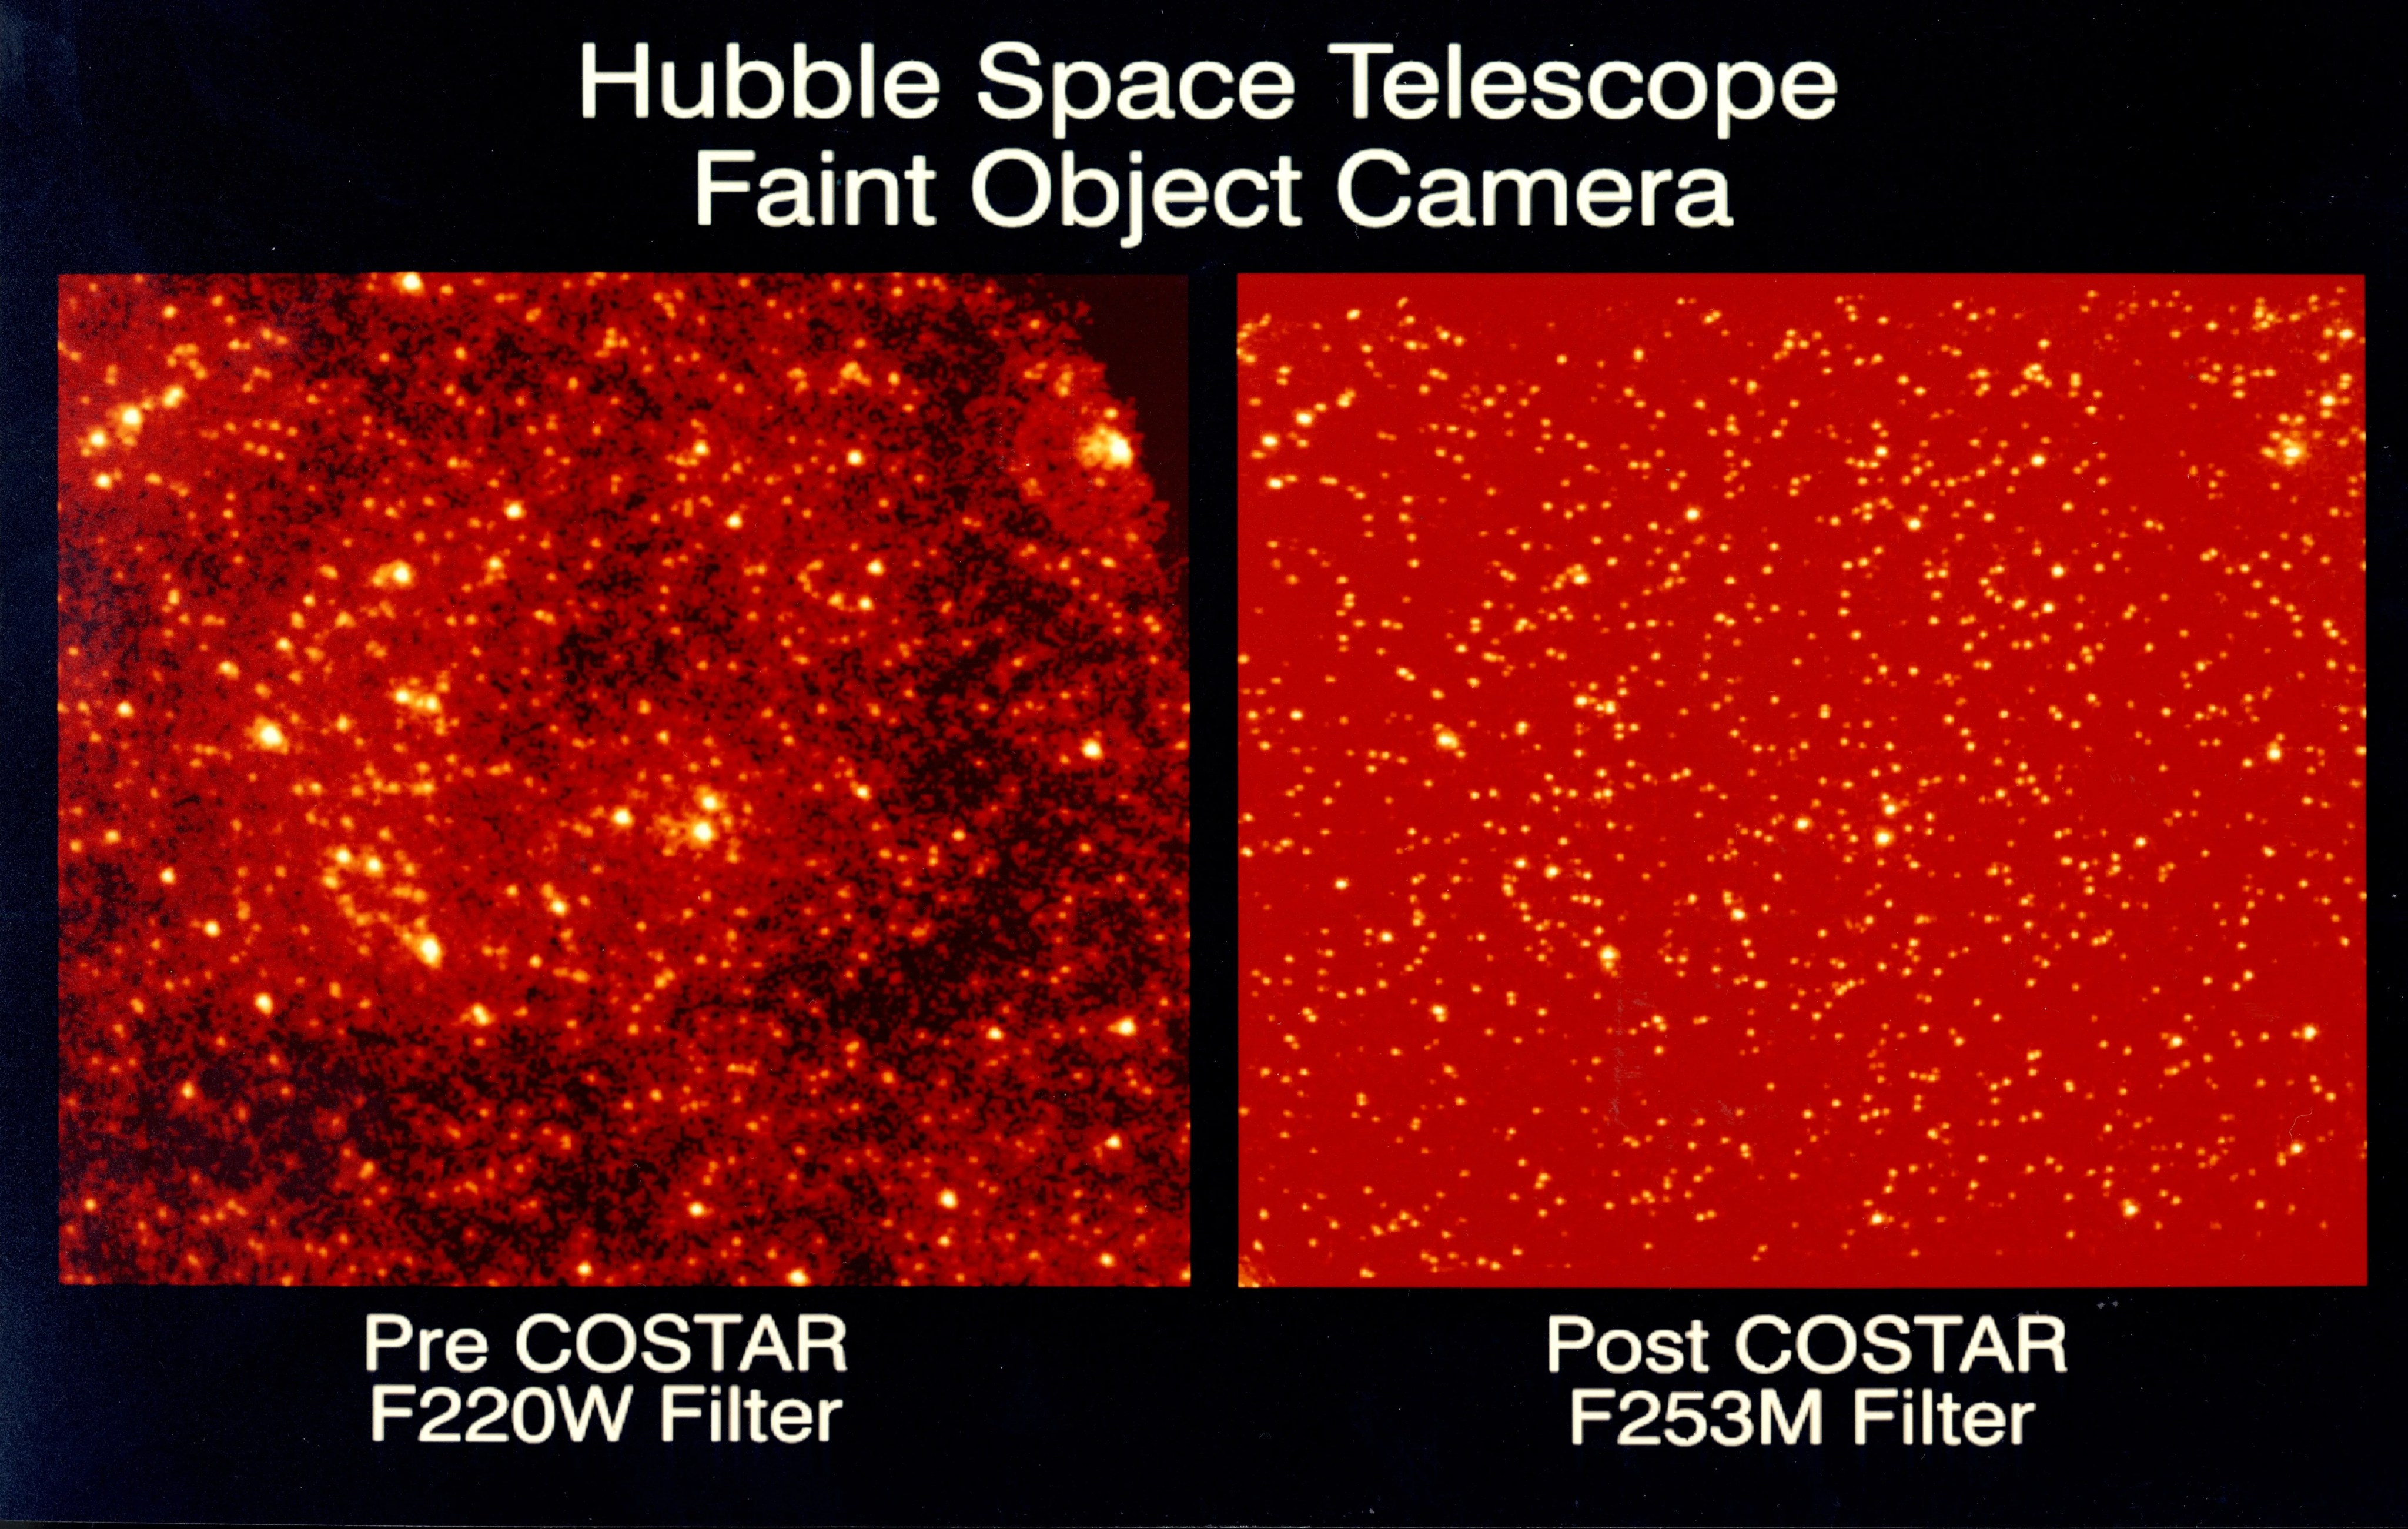 Left: dark red to black background with bright-red gas clumps dotted with yellow stars. Right: red background dotted with yellow stars